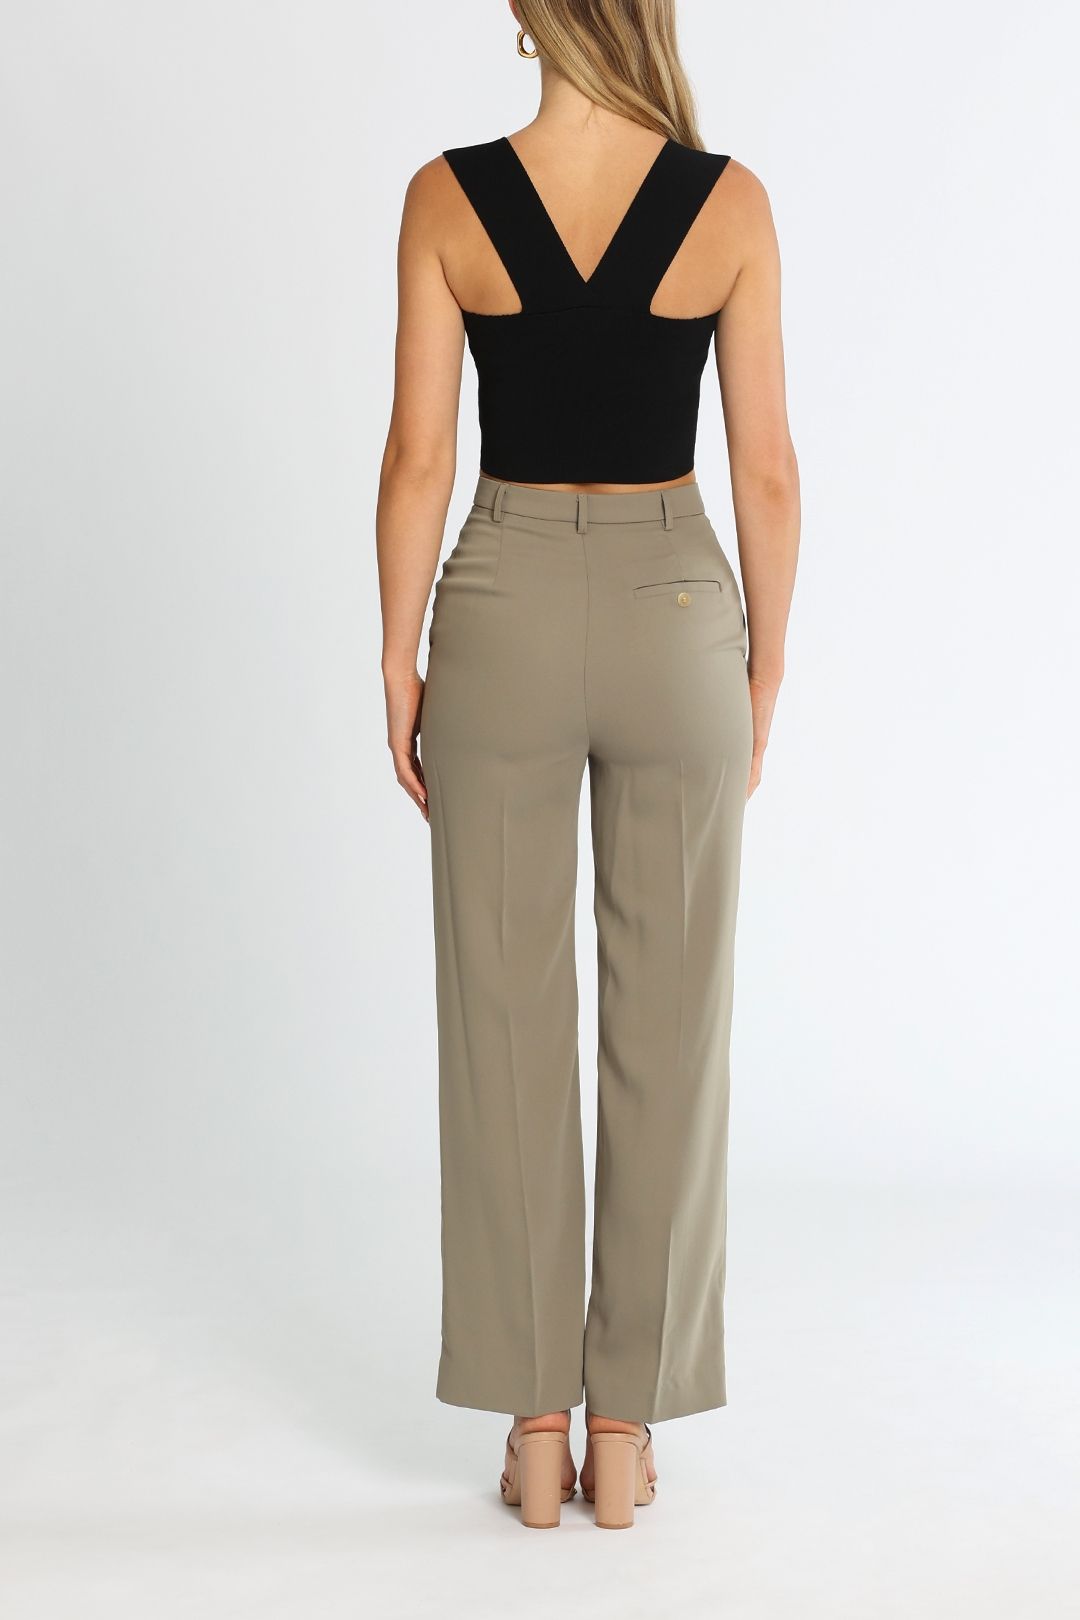 The Frankie Shop Isla Tailored Trousers Coriander Back Pocket